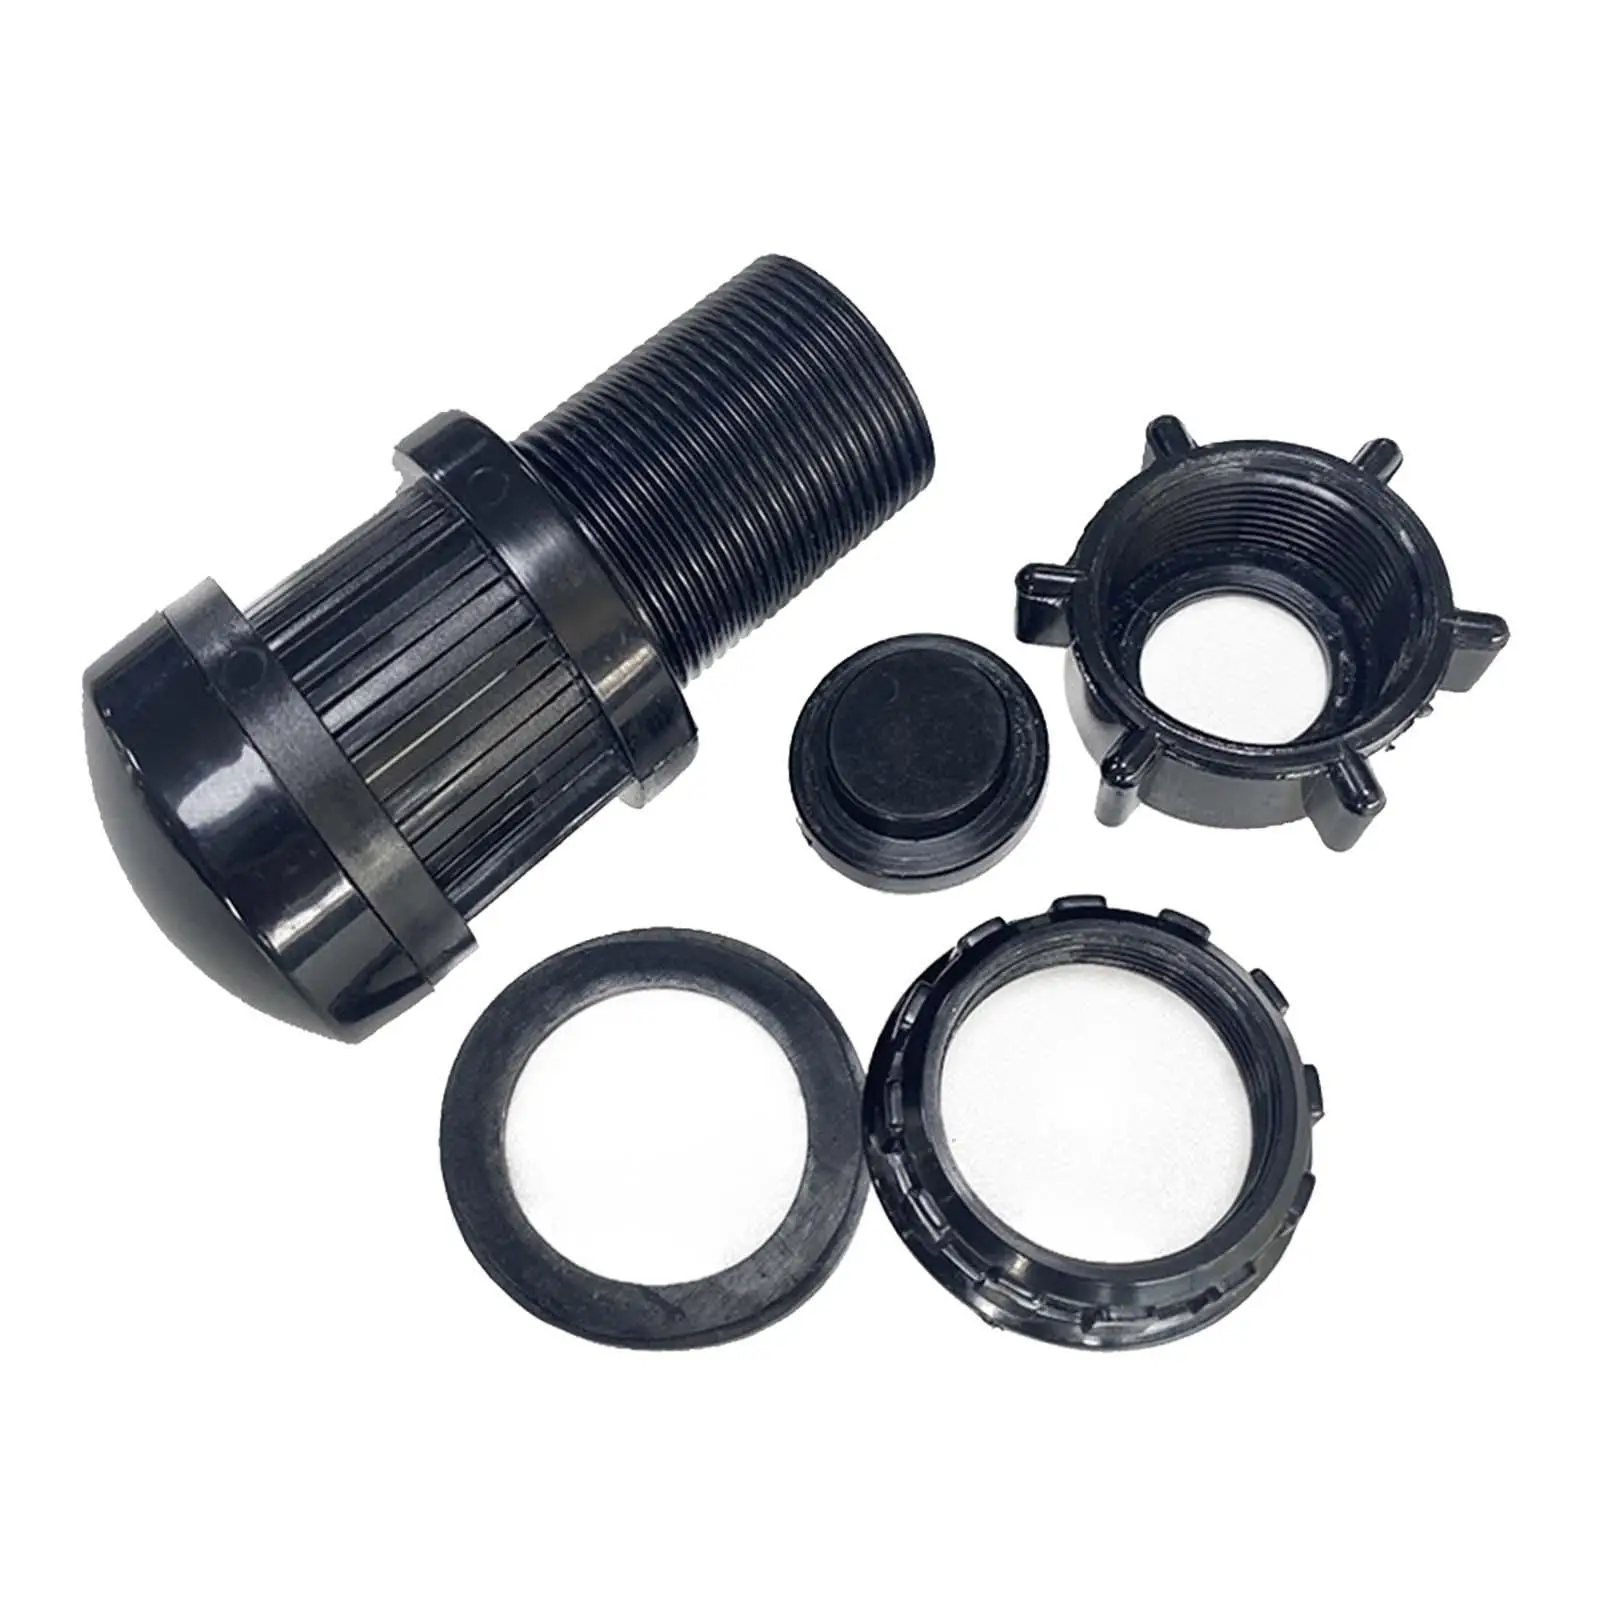 Sand Filter Drain Plug Assembly Replacement Water Drain Set Drain Valve for Pool Sand Filter Pump Hot Tub Sand Tank Accessories